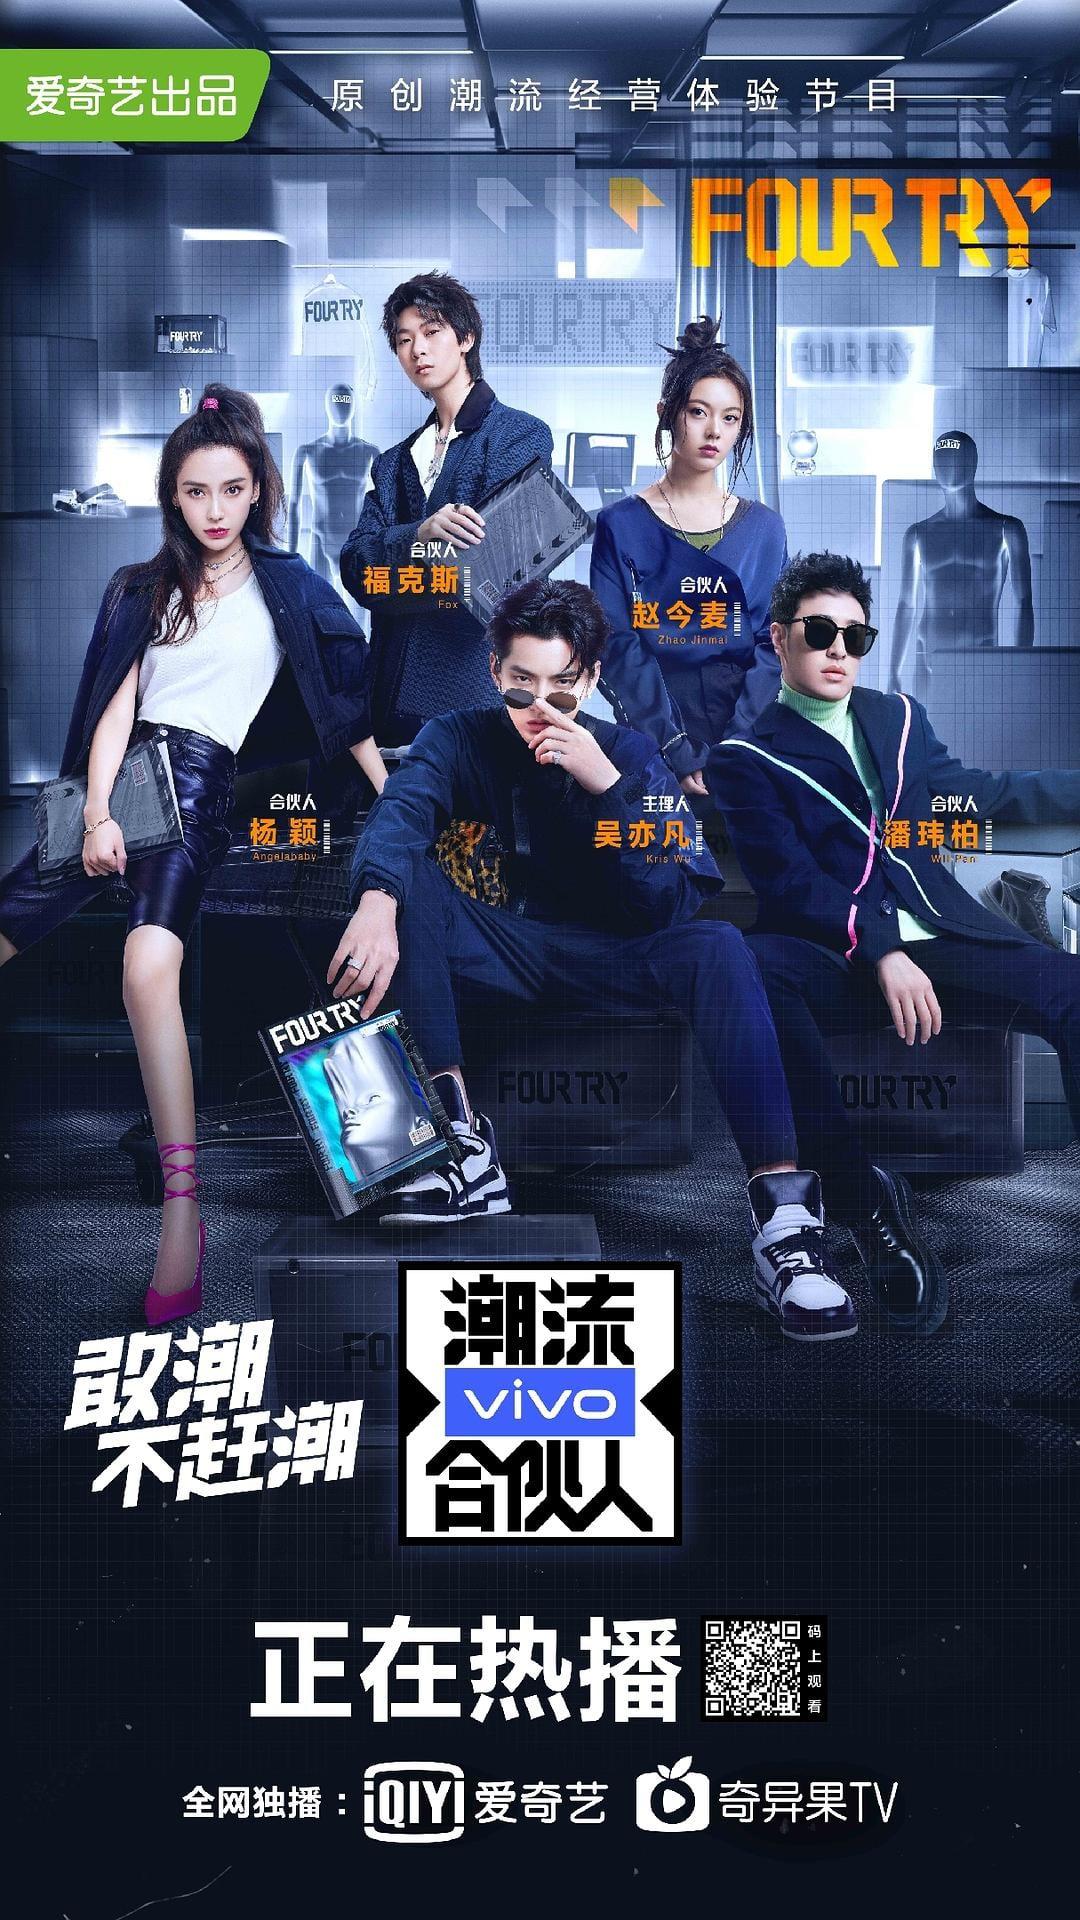 TV ratings for Four Try(潮流合伙人) in Poland. iqiyi TV series